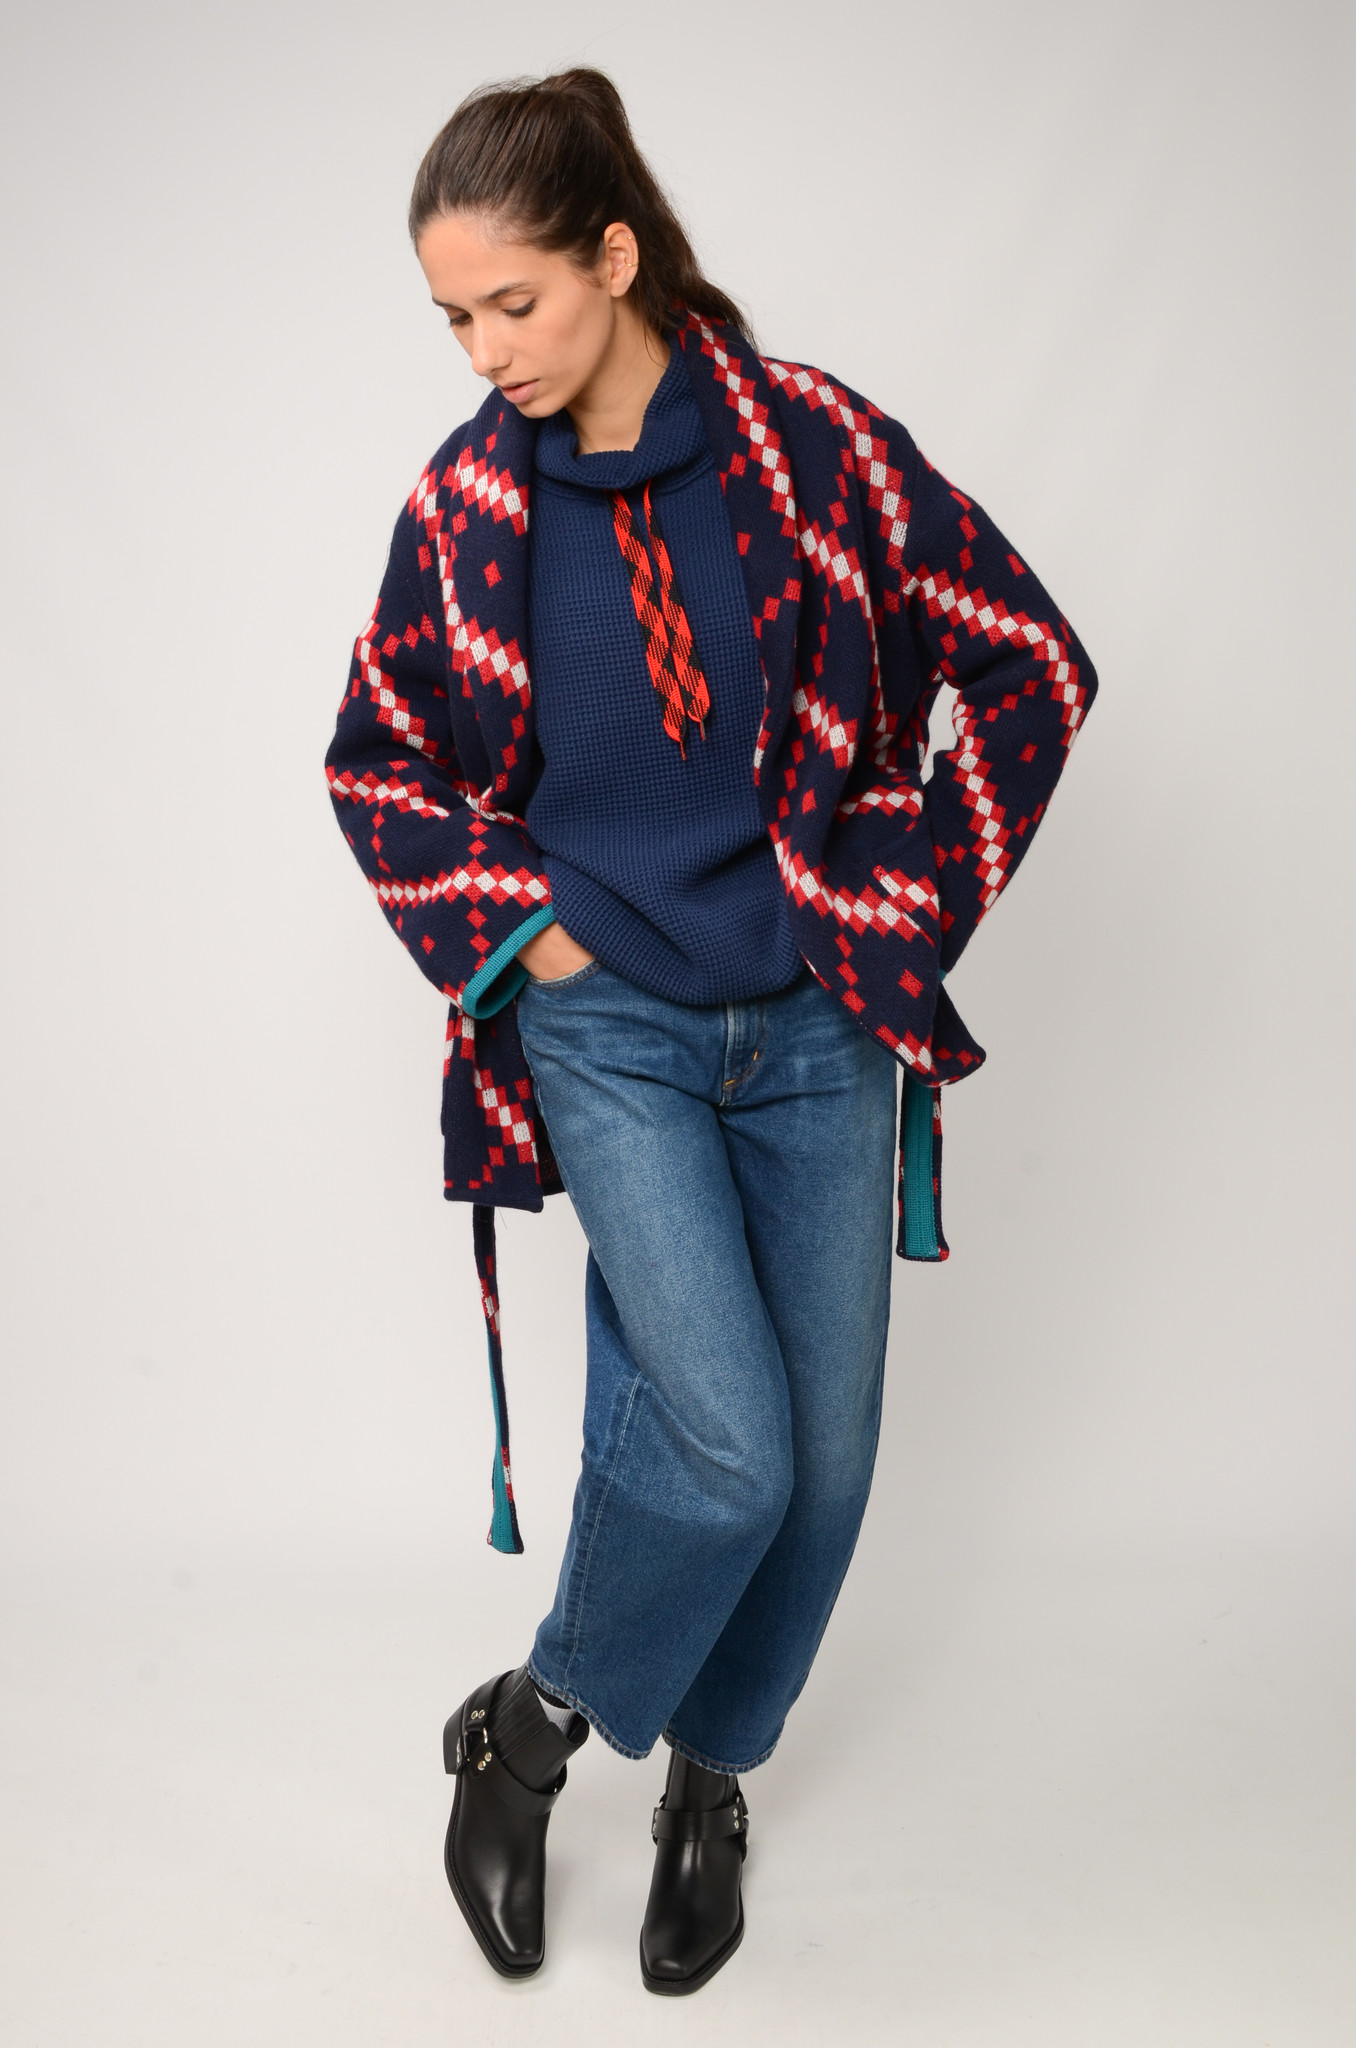 HONEYCOMB SWEATER IN NAVY & RED-2